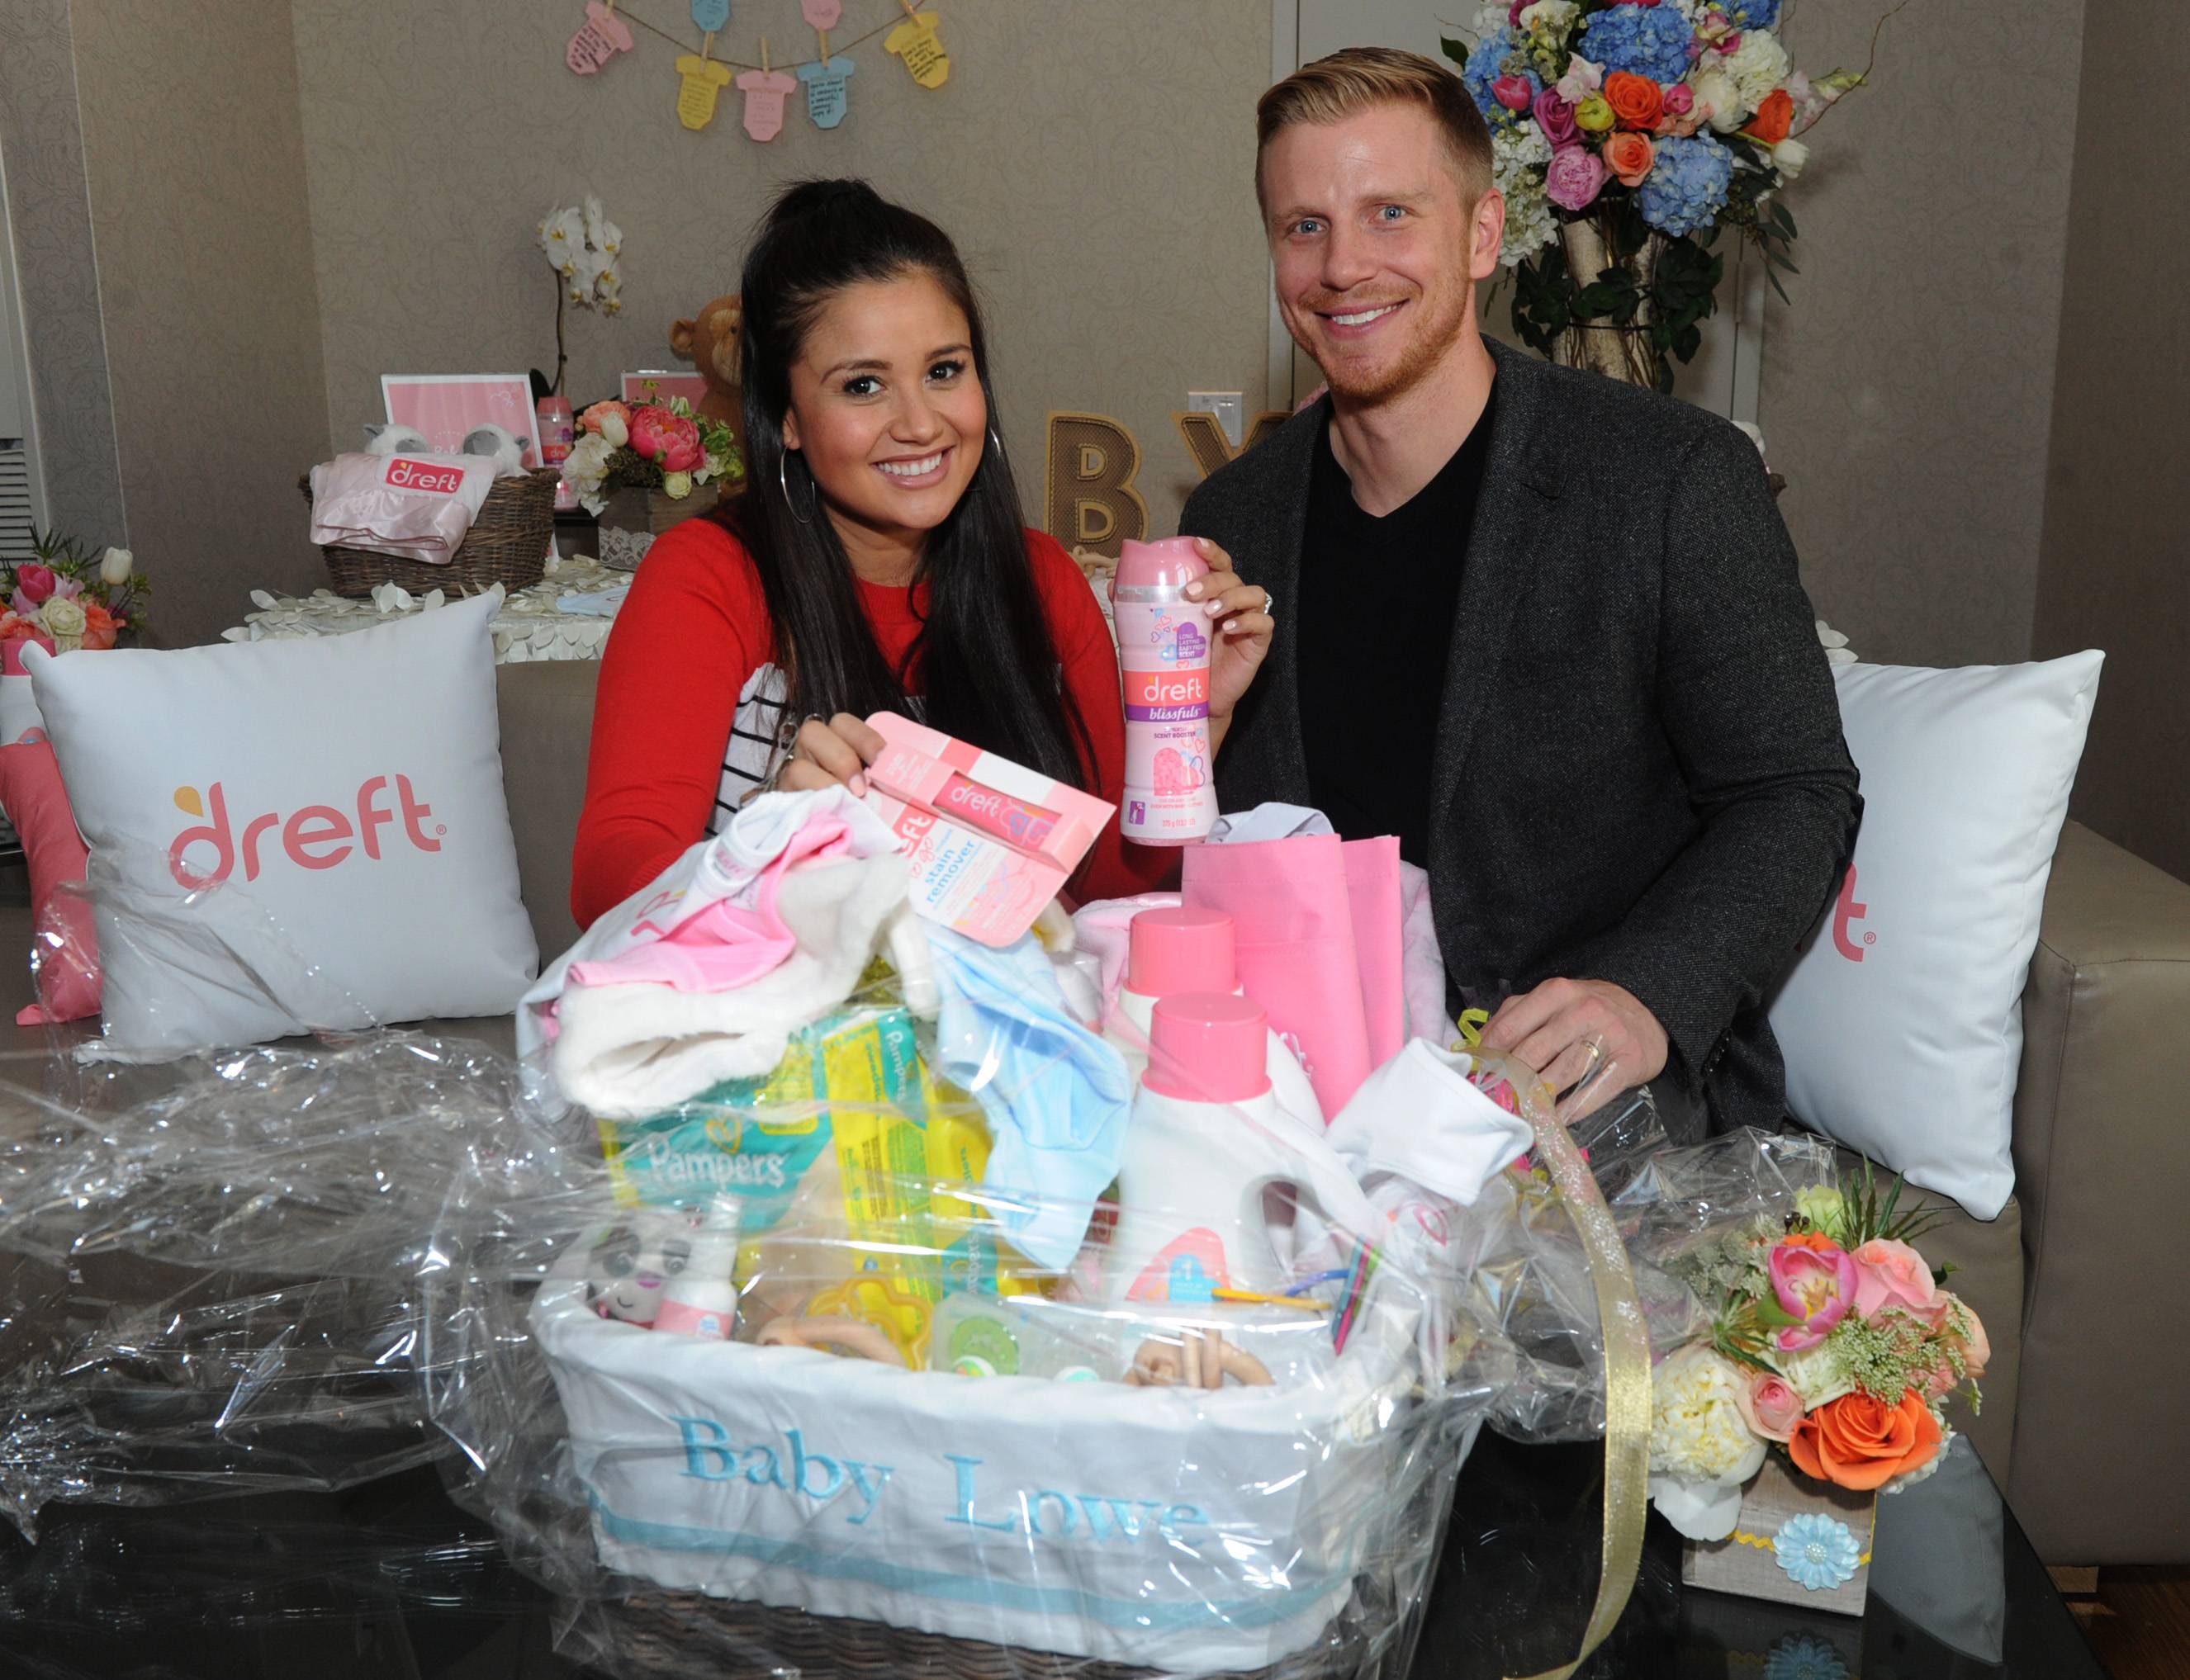 Reality TV couple Sean and Catherine Lowe celebrate their pregnancy at the Dreft Loads of Love baby shower, Wednesday, April 27, 2016, in New York. Visit Dreft.com and the brands social channels for more information about the couples parenting journey. (Diane Bondareff/Invision for Dreft/AP Images)